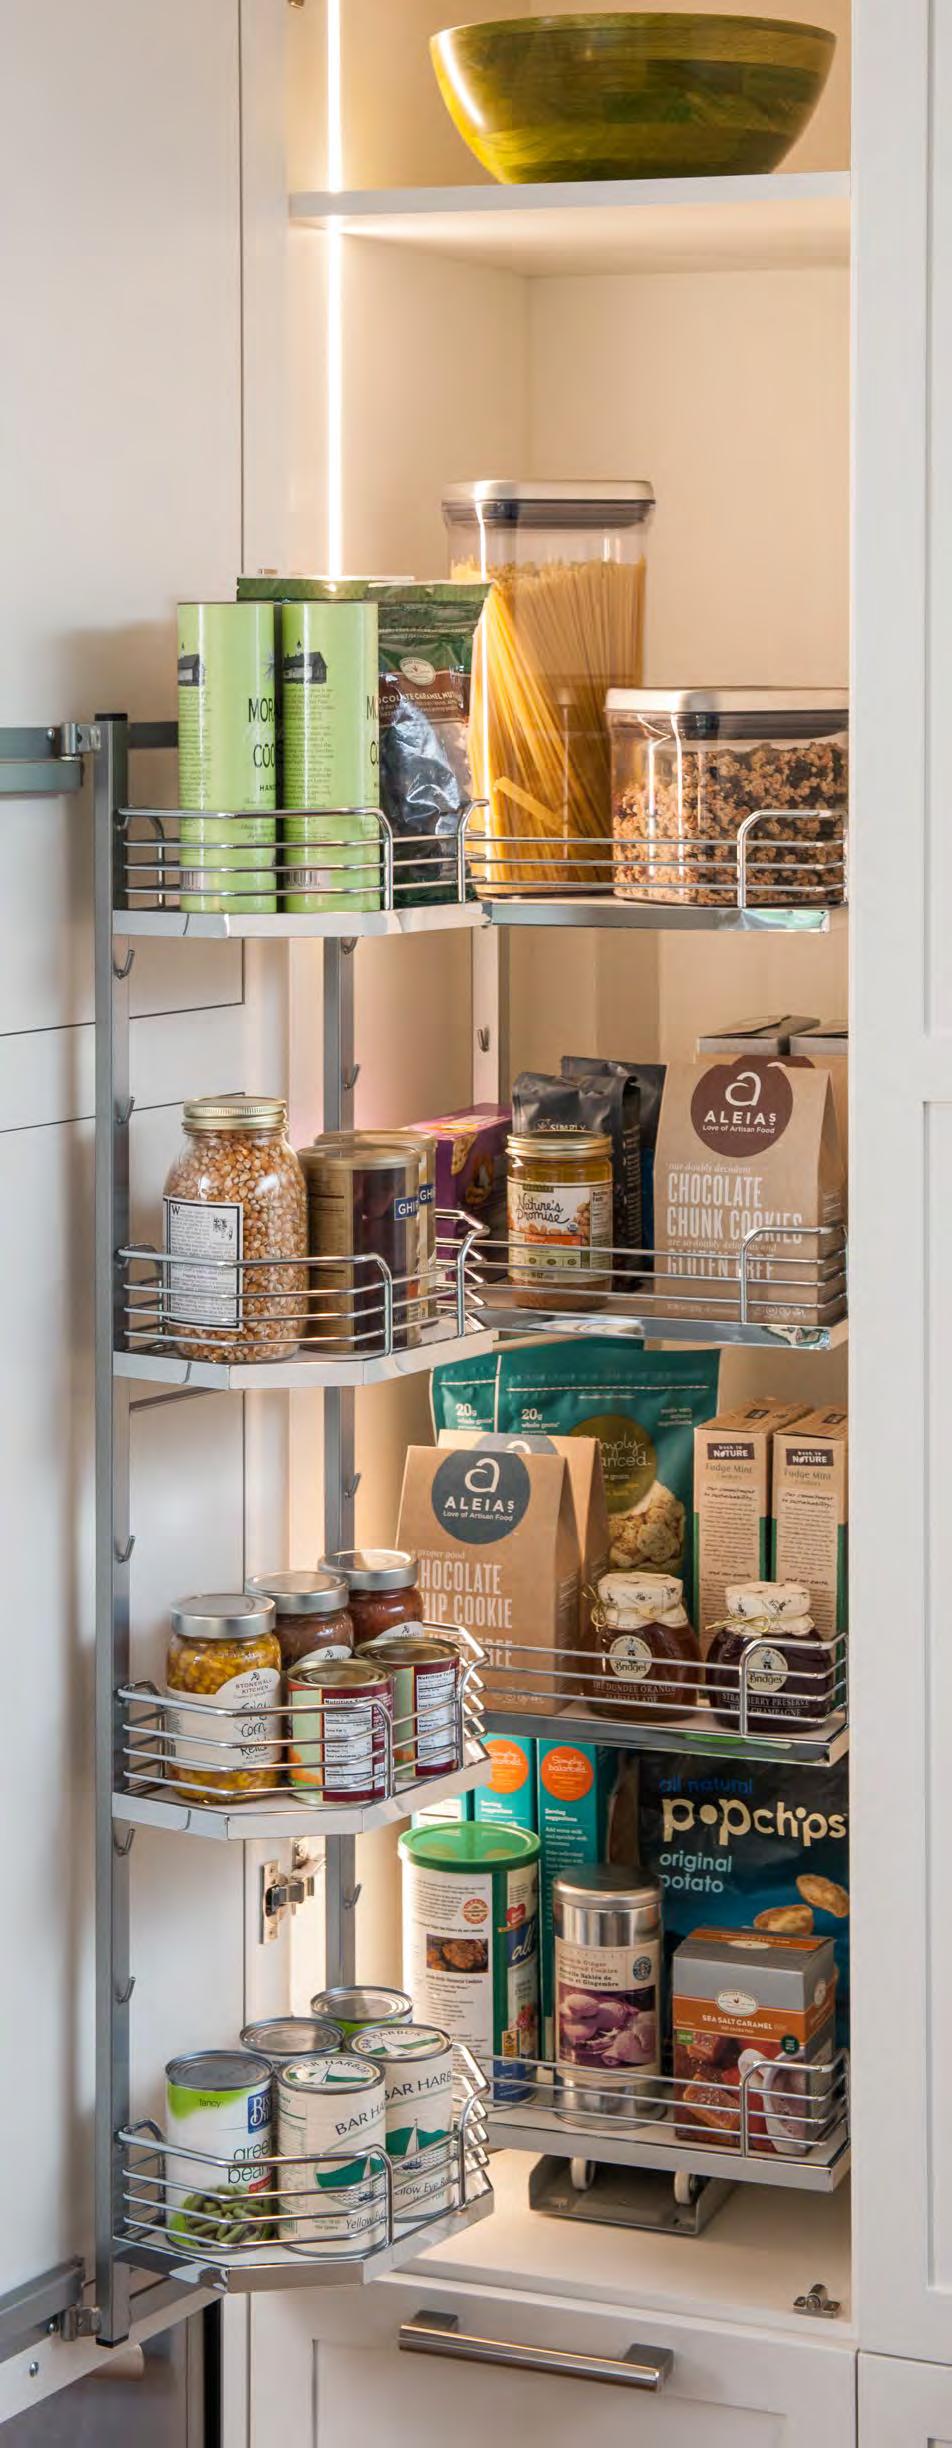 TALL TANDEM PANTRY ALMOST A PITY TO HIDE THEM BEHIND DOORS IF THE TANDEM CHEF S PANTRY IS GREAT, WHAT COULD BE BETTER?